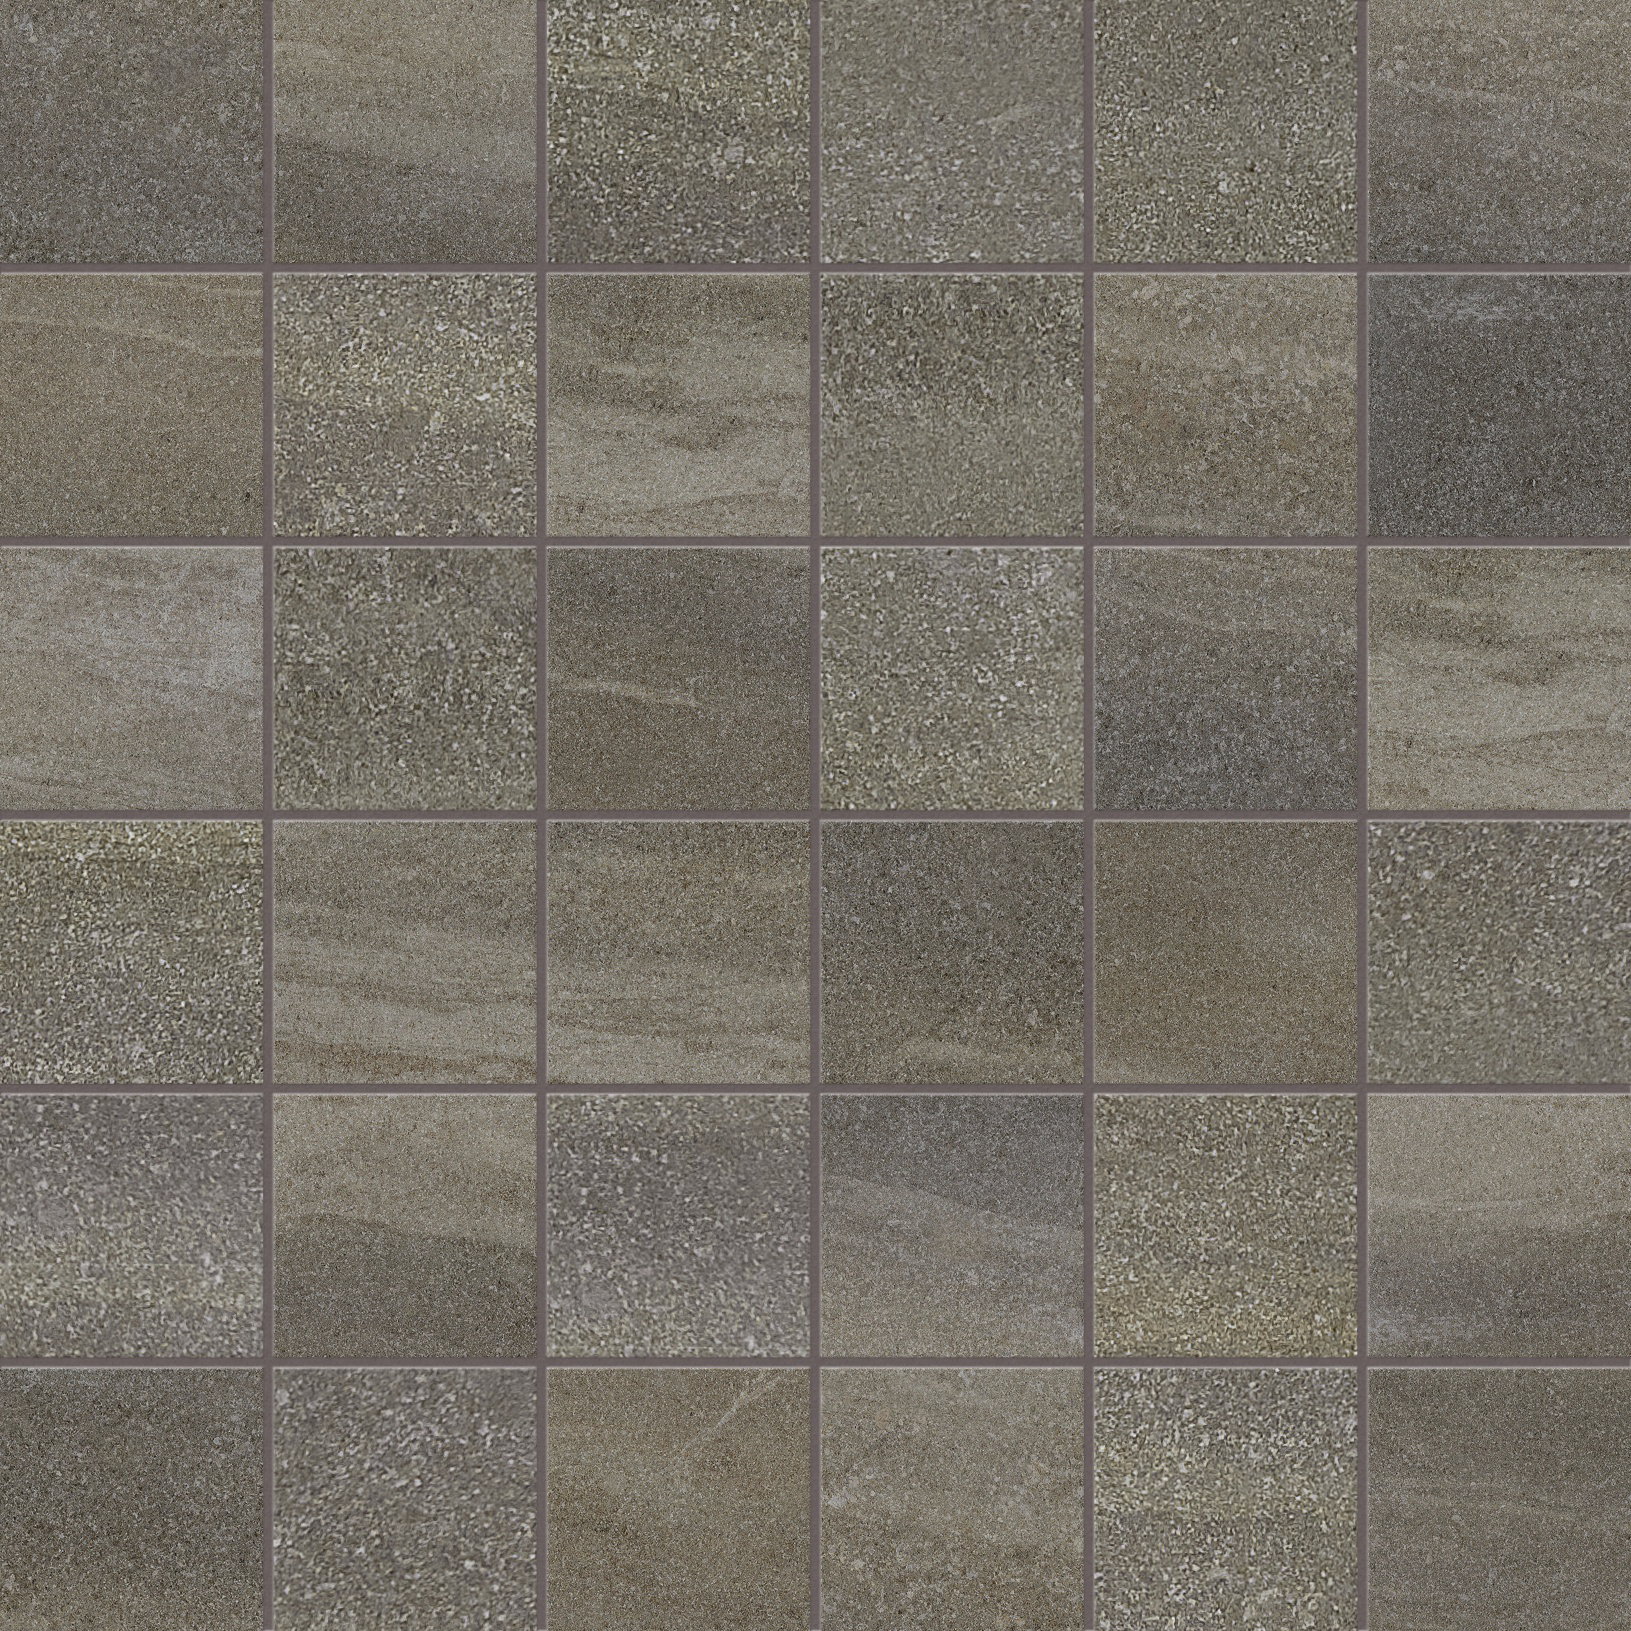 mica straight stack 2x2-inch pattern glazed porcelain mosaic from crux anatolia collection distributed by surface group international matte finish straight edge edge mesh shape